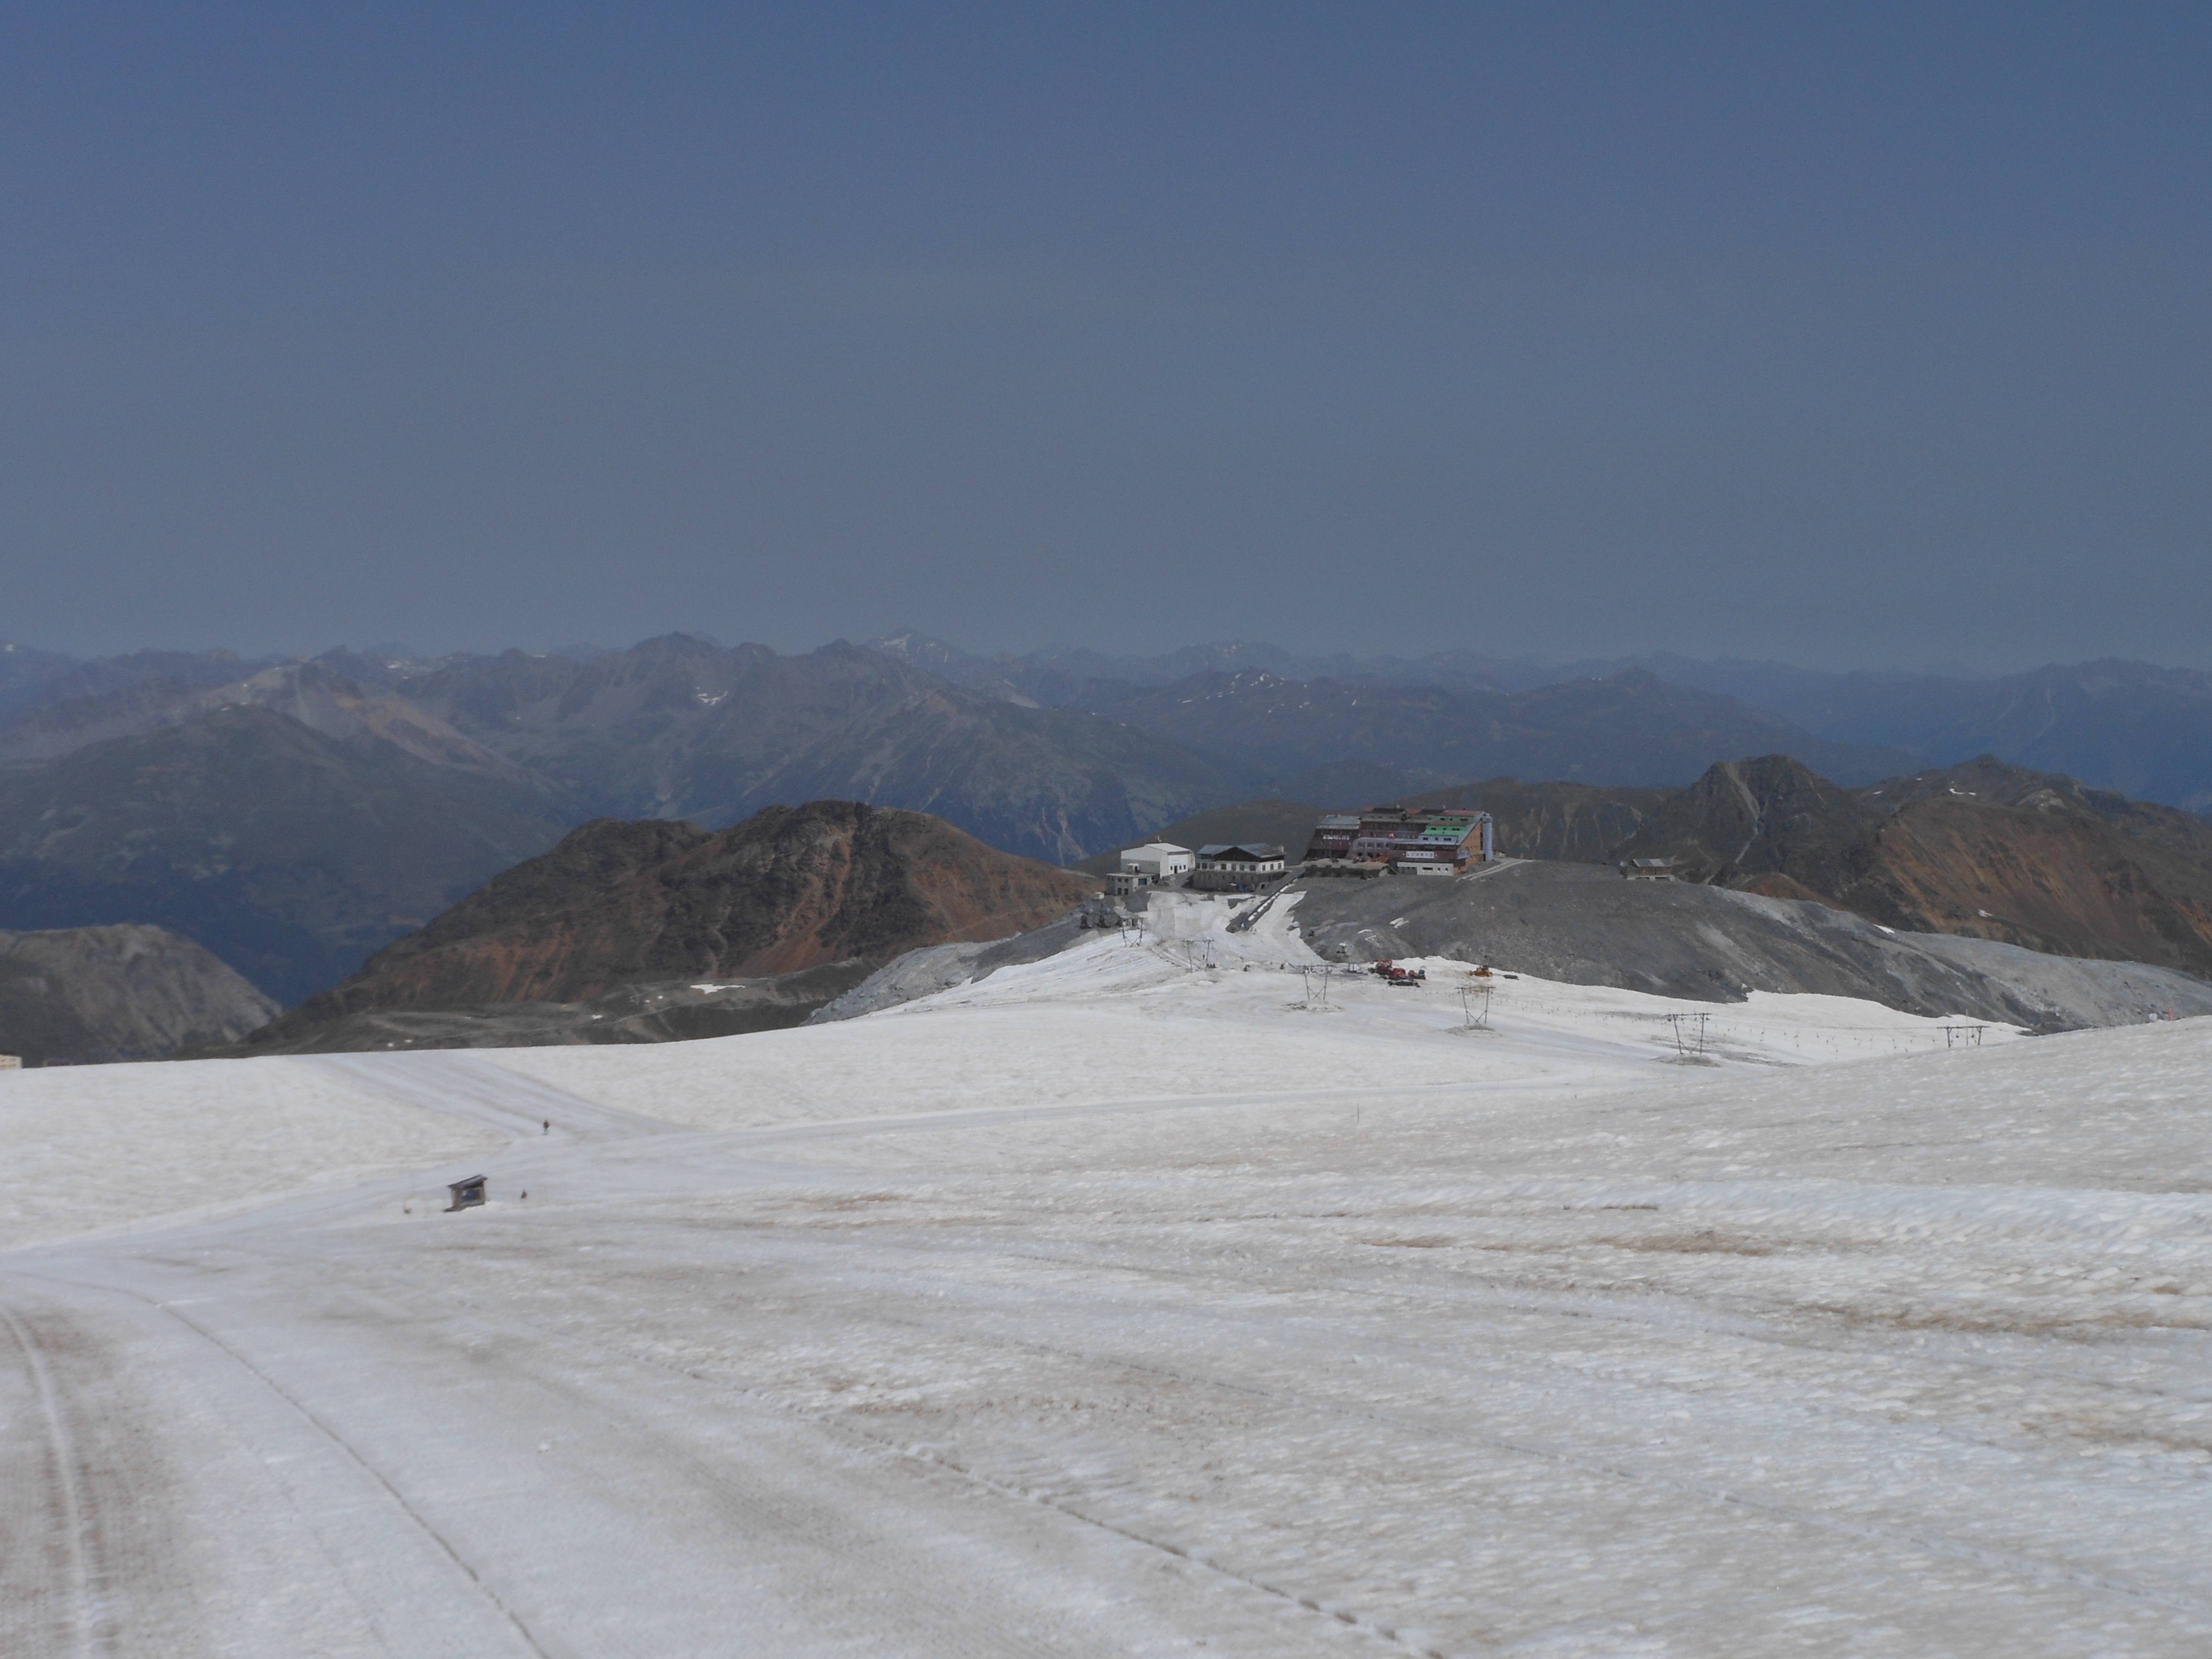 Summer Ski Odyssey Reveals Decaying Dreams in Italy